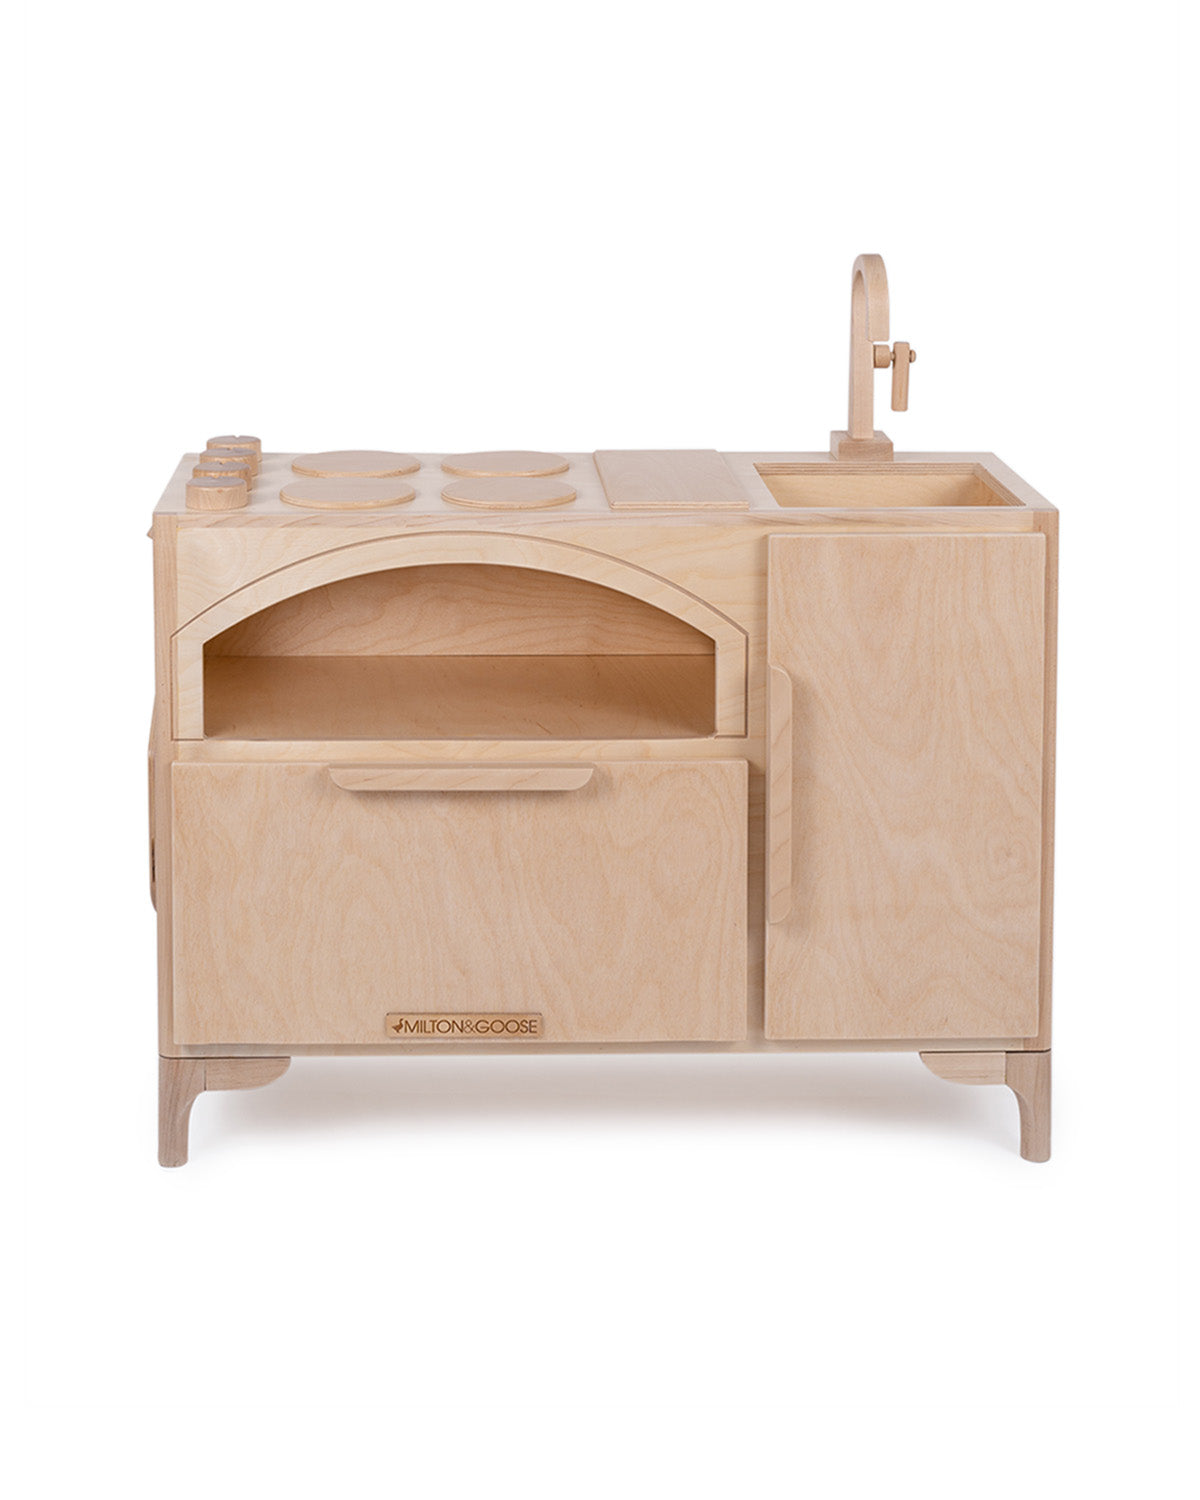 Milton & Goose's Luca Play Kitchen with a clear coat to show natural wood grain. Featuring a pizza oven and coordinating pizza paddle,.